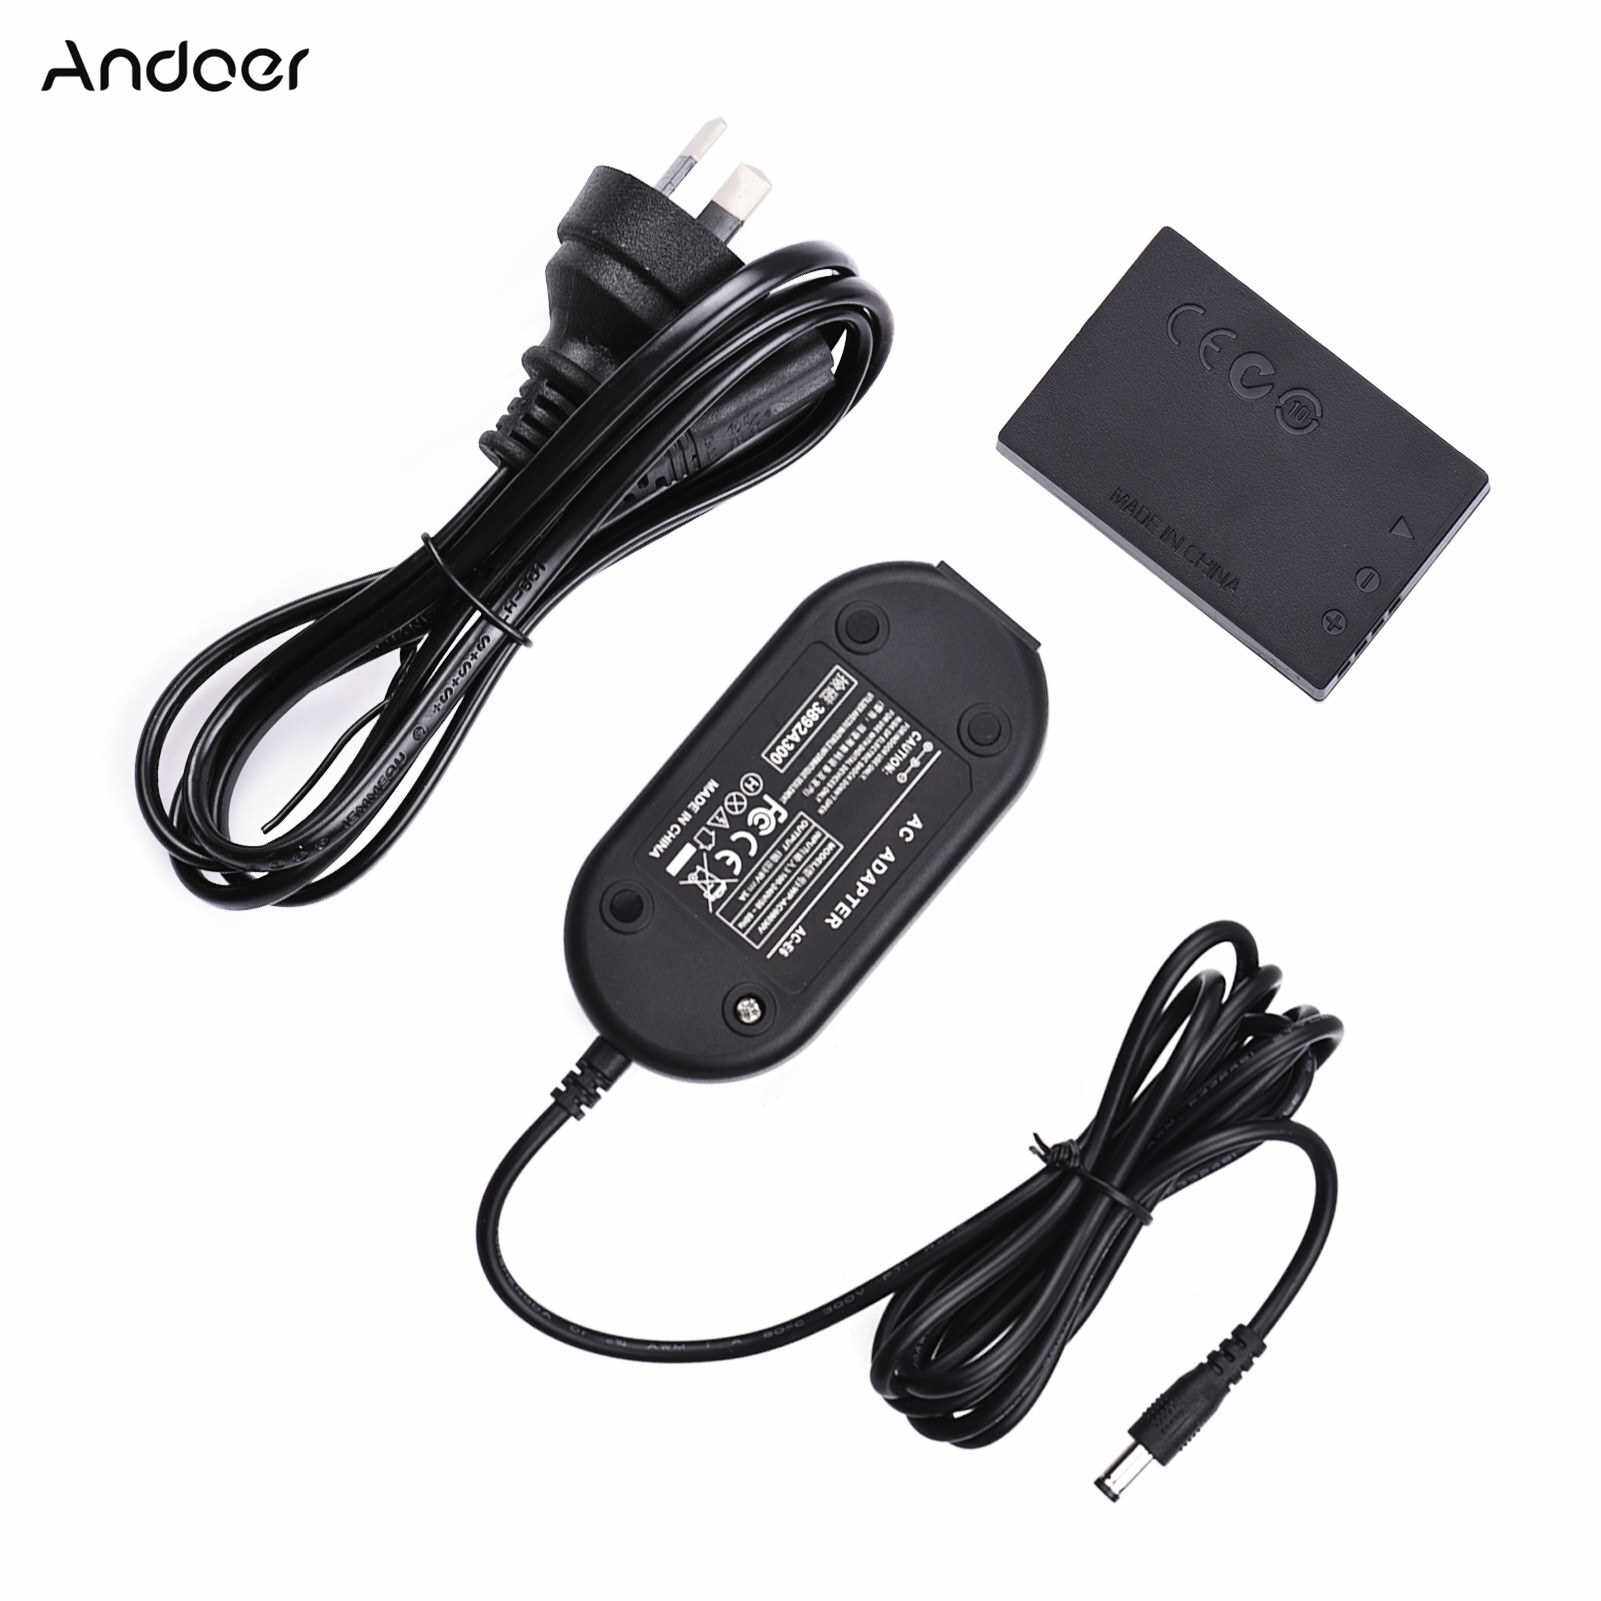 Andoer DR-E12 Dummy Battery AC Power Adapter Camera Power Supply with Power Plug Replacement for Canon EOS M100 M M2 M10 M50 (Black)